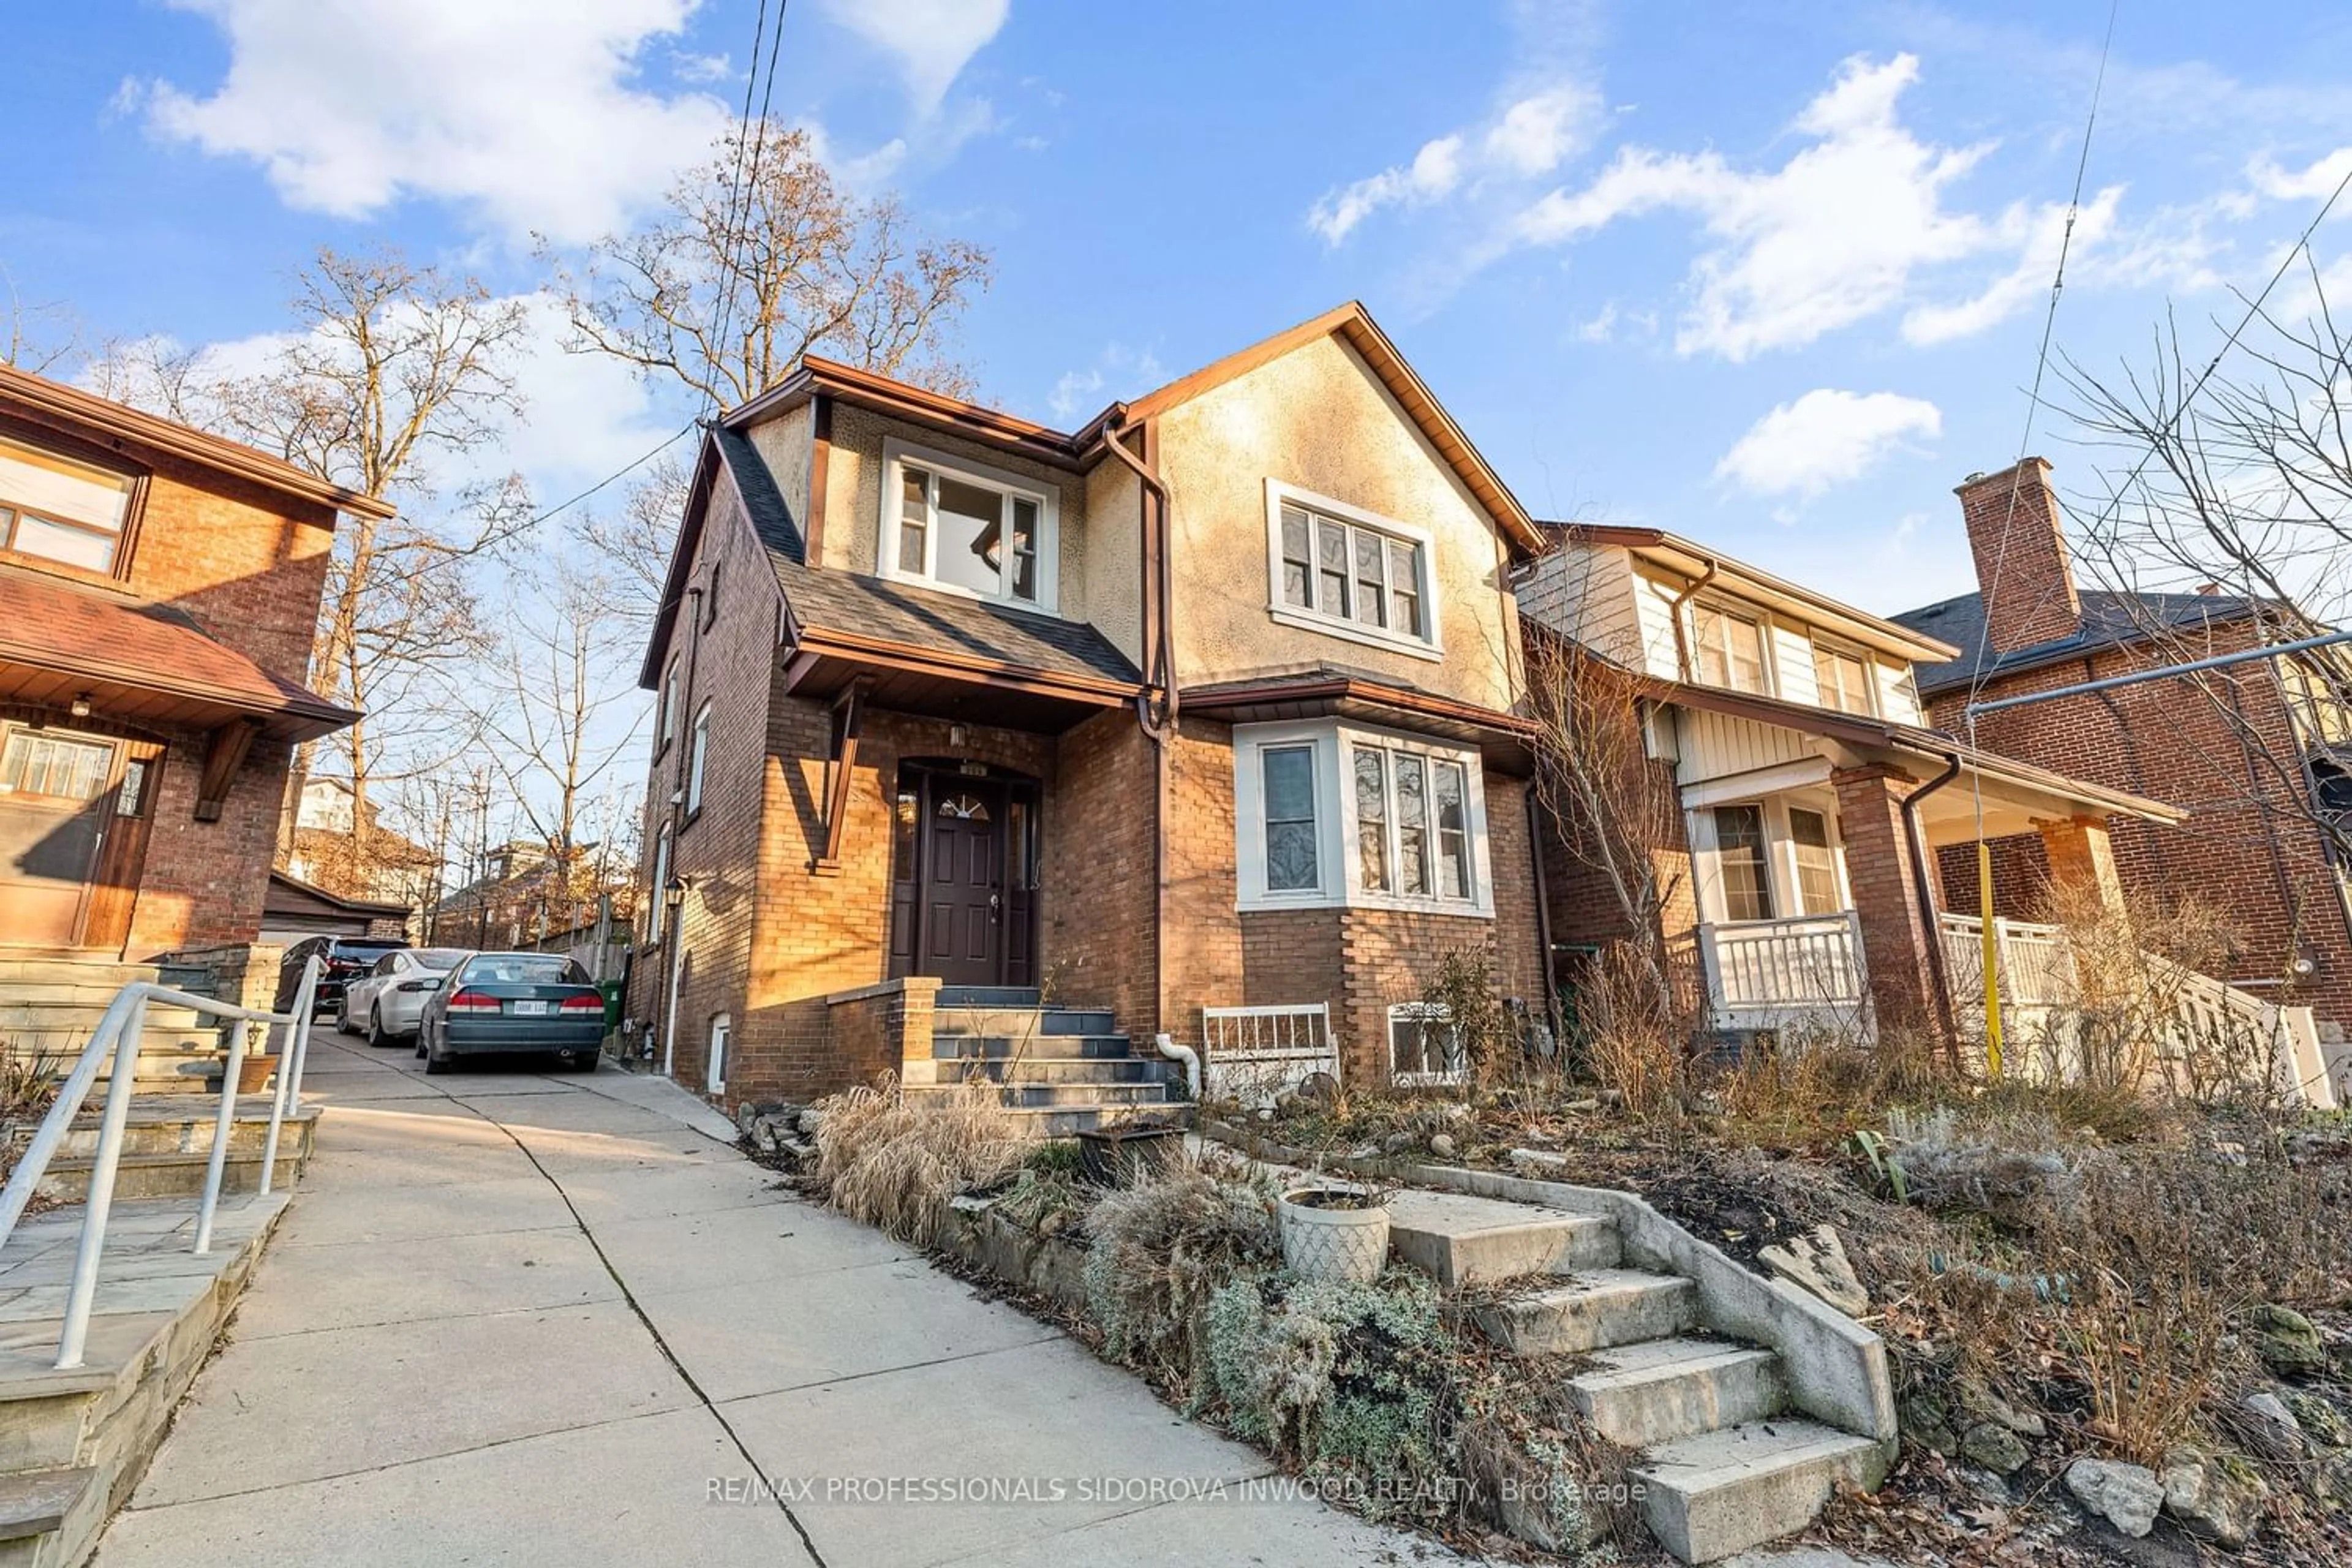 Frontside or backside of a home for 255 Quebec Ave, Toronto Ontario M6P 2T9